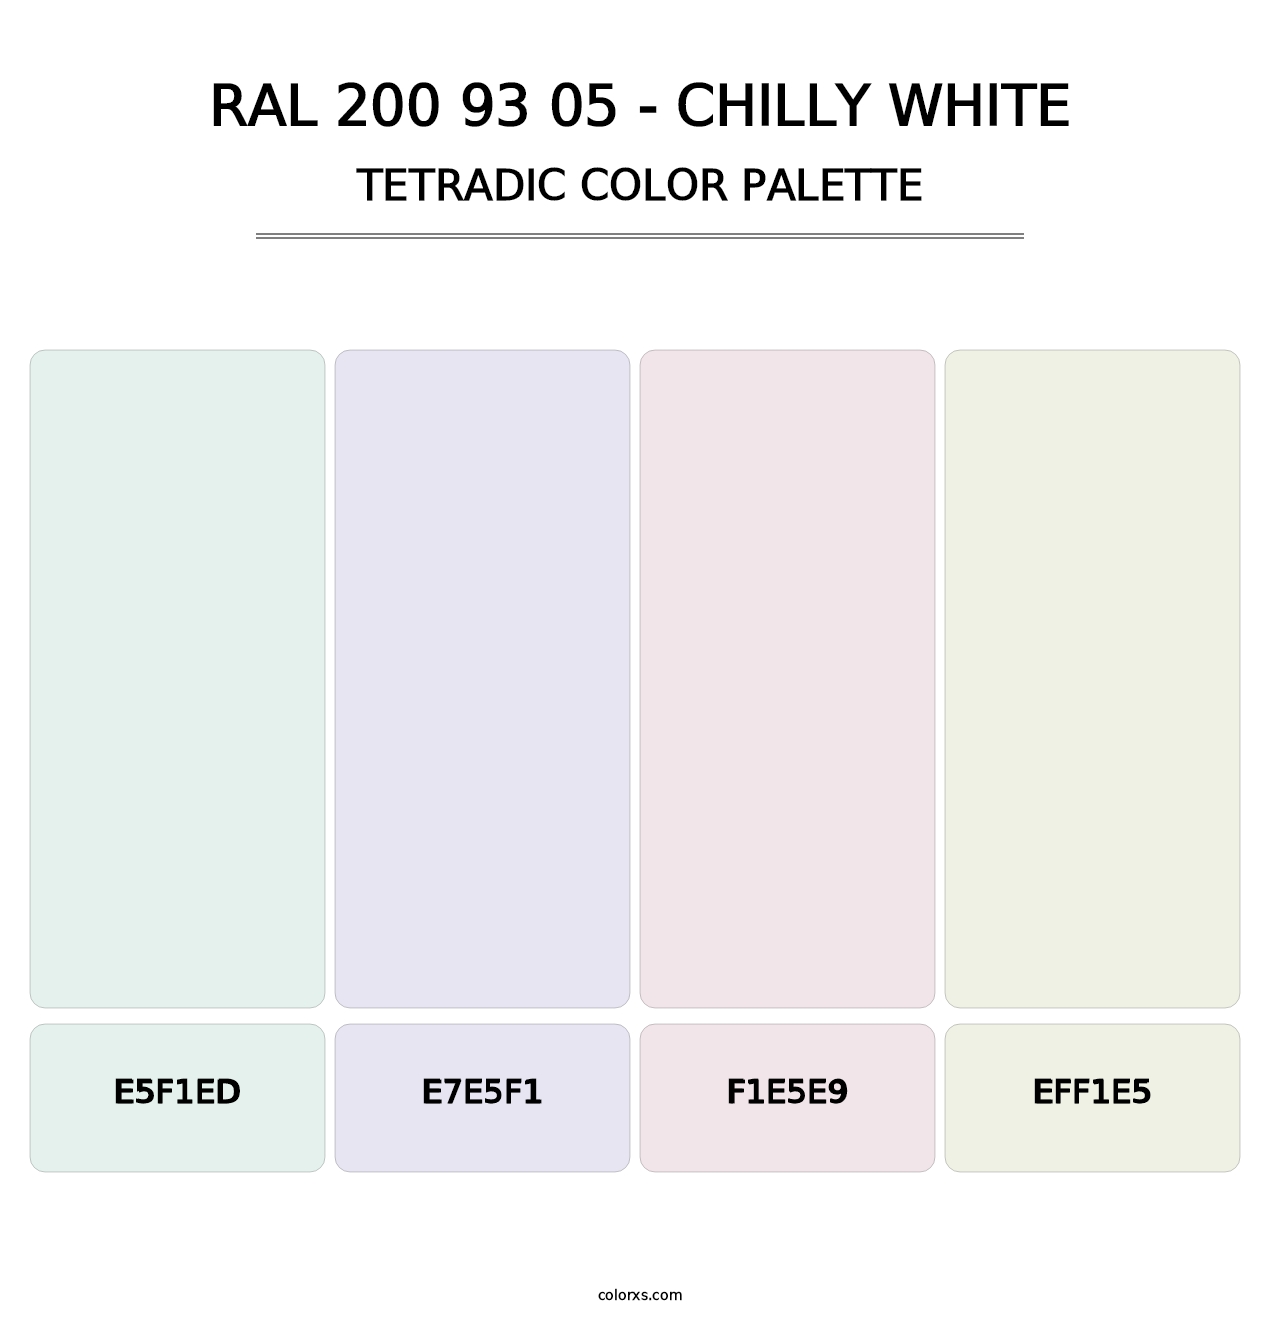 RAL 200 93 05 - Chilly White - Tetradic Color Palette